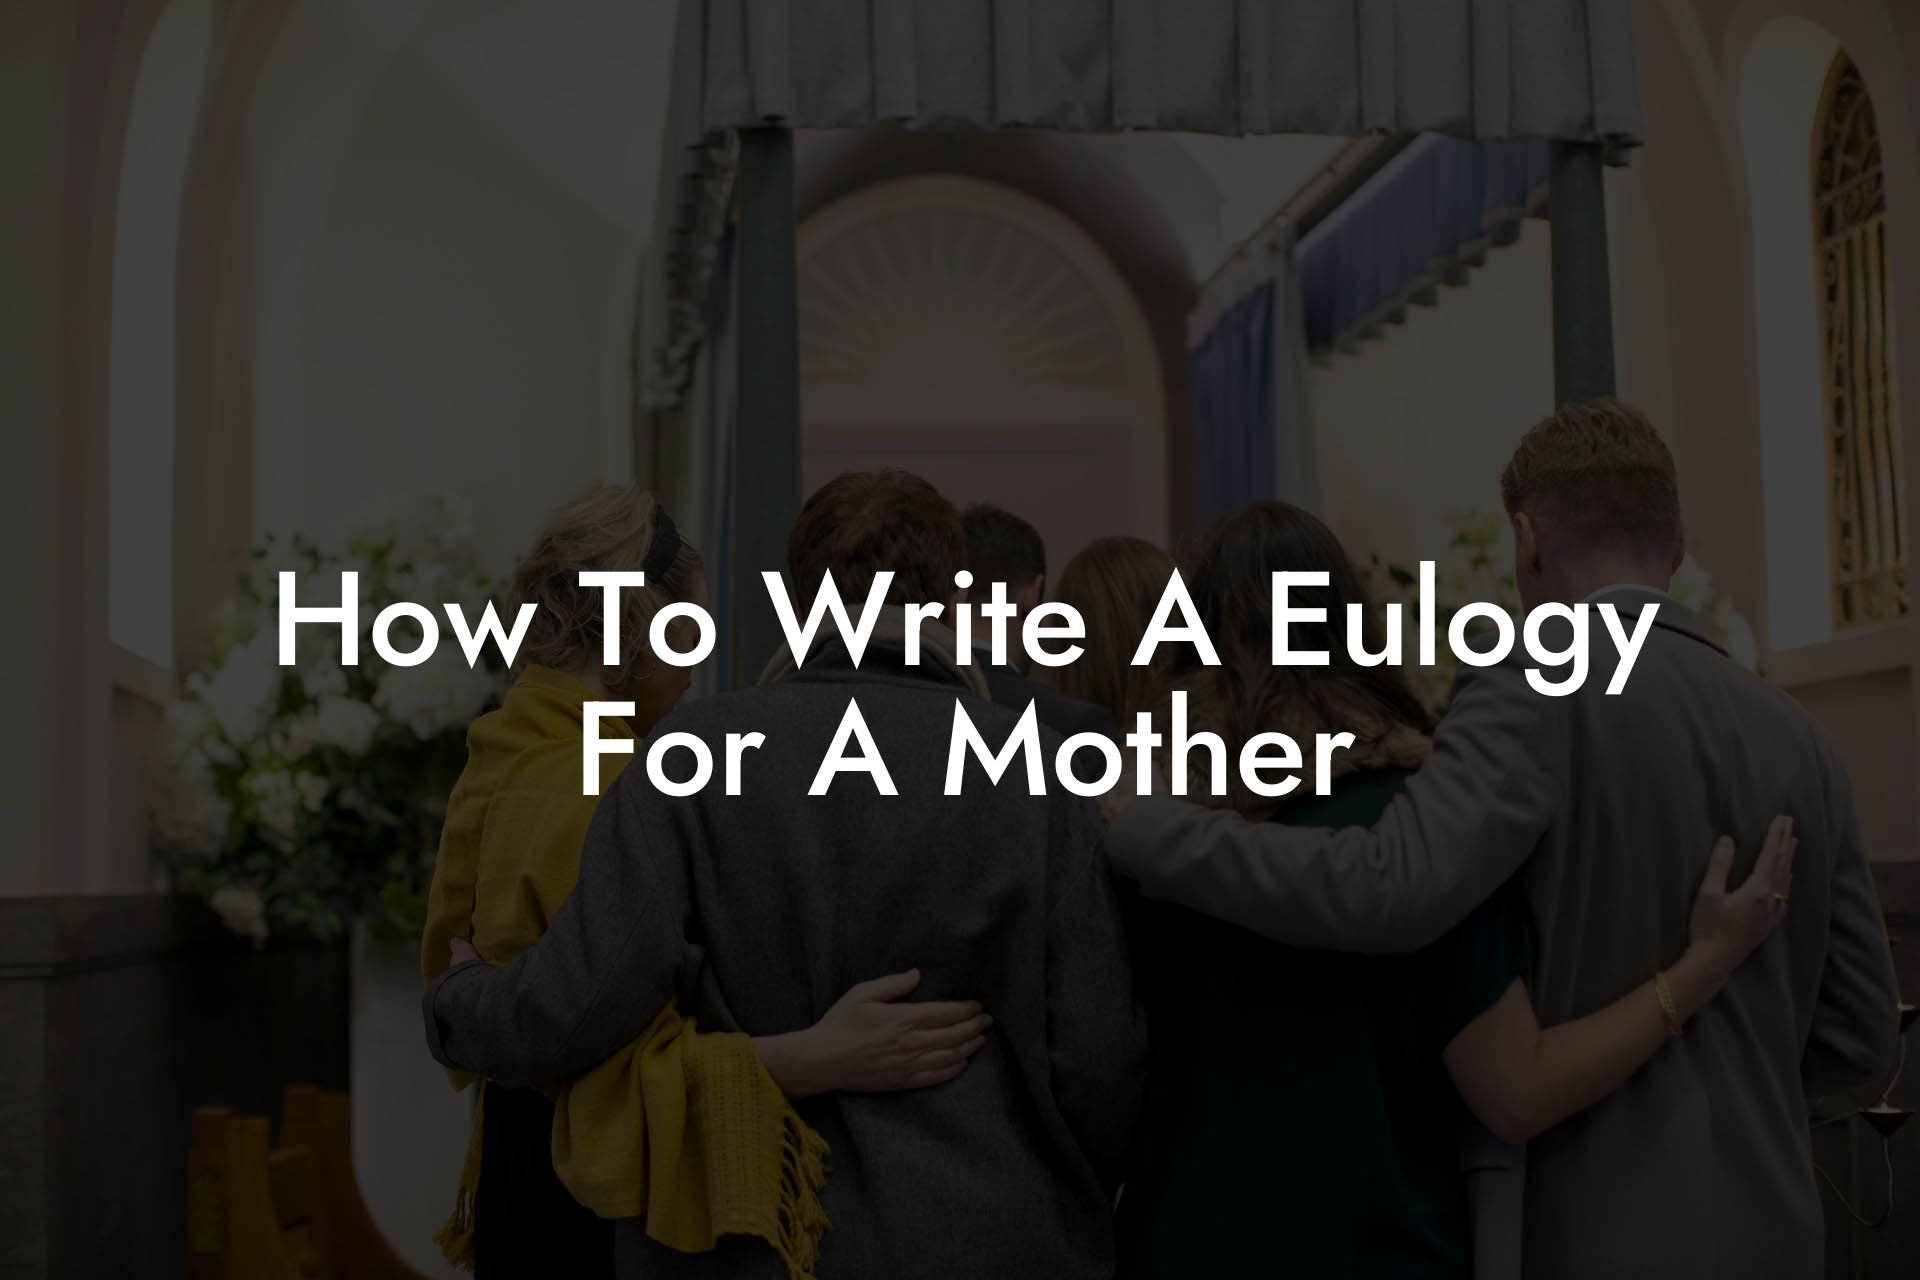 How To Write A Eulogy For A Mother